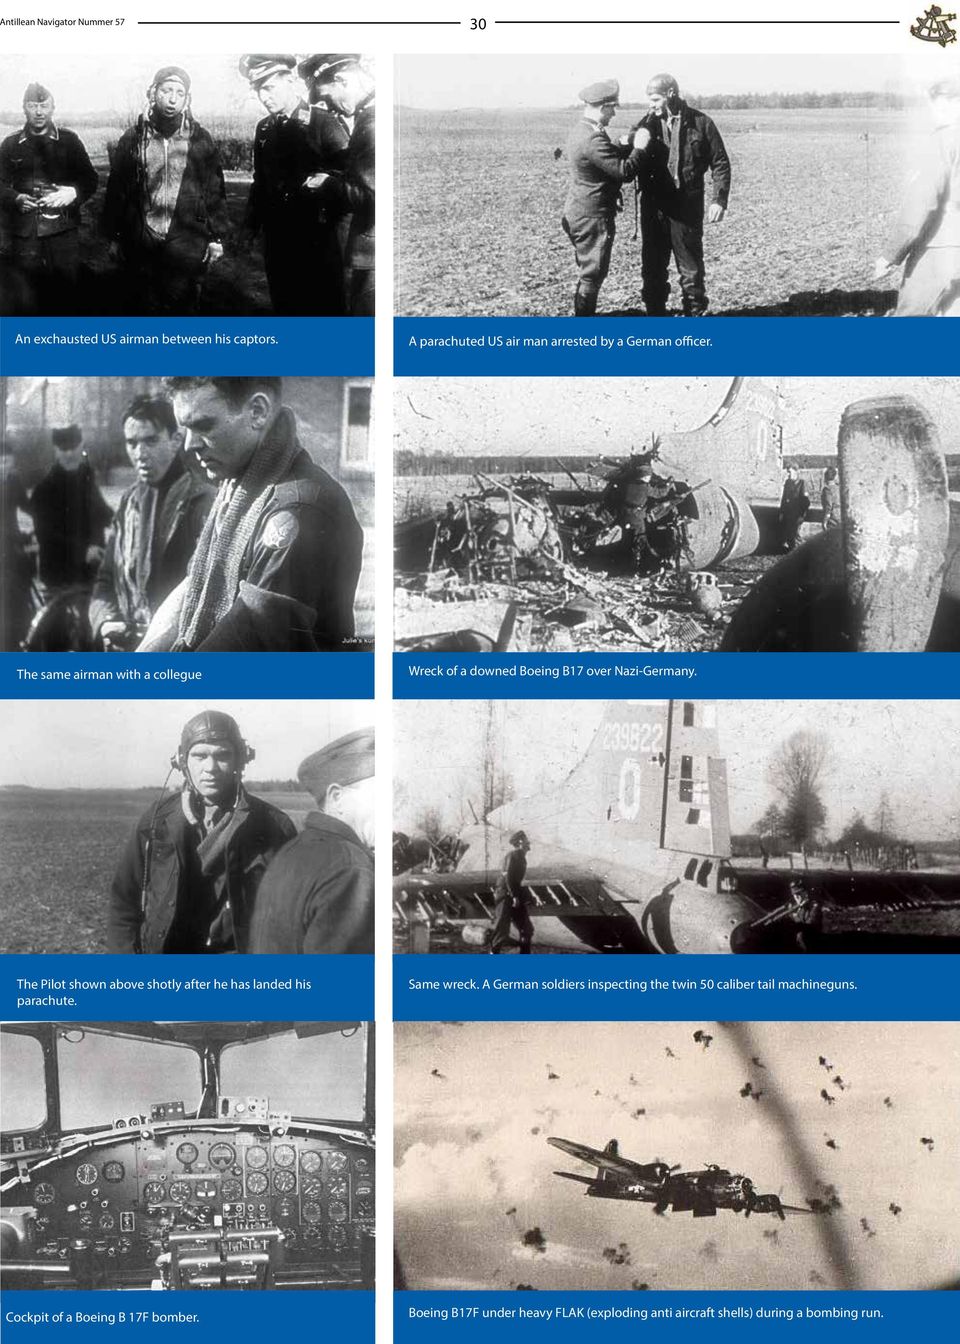 The same airman with a collegue Wreck of a downed Boeing B17 over Nazi-Germany.